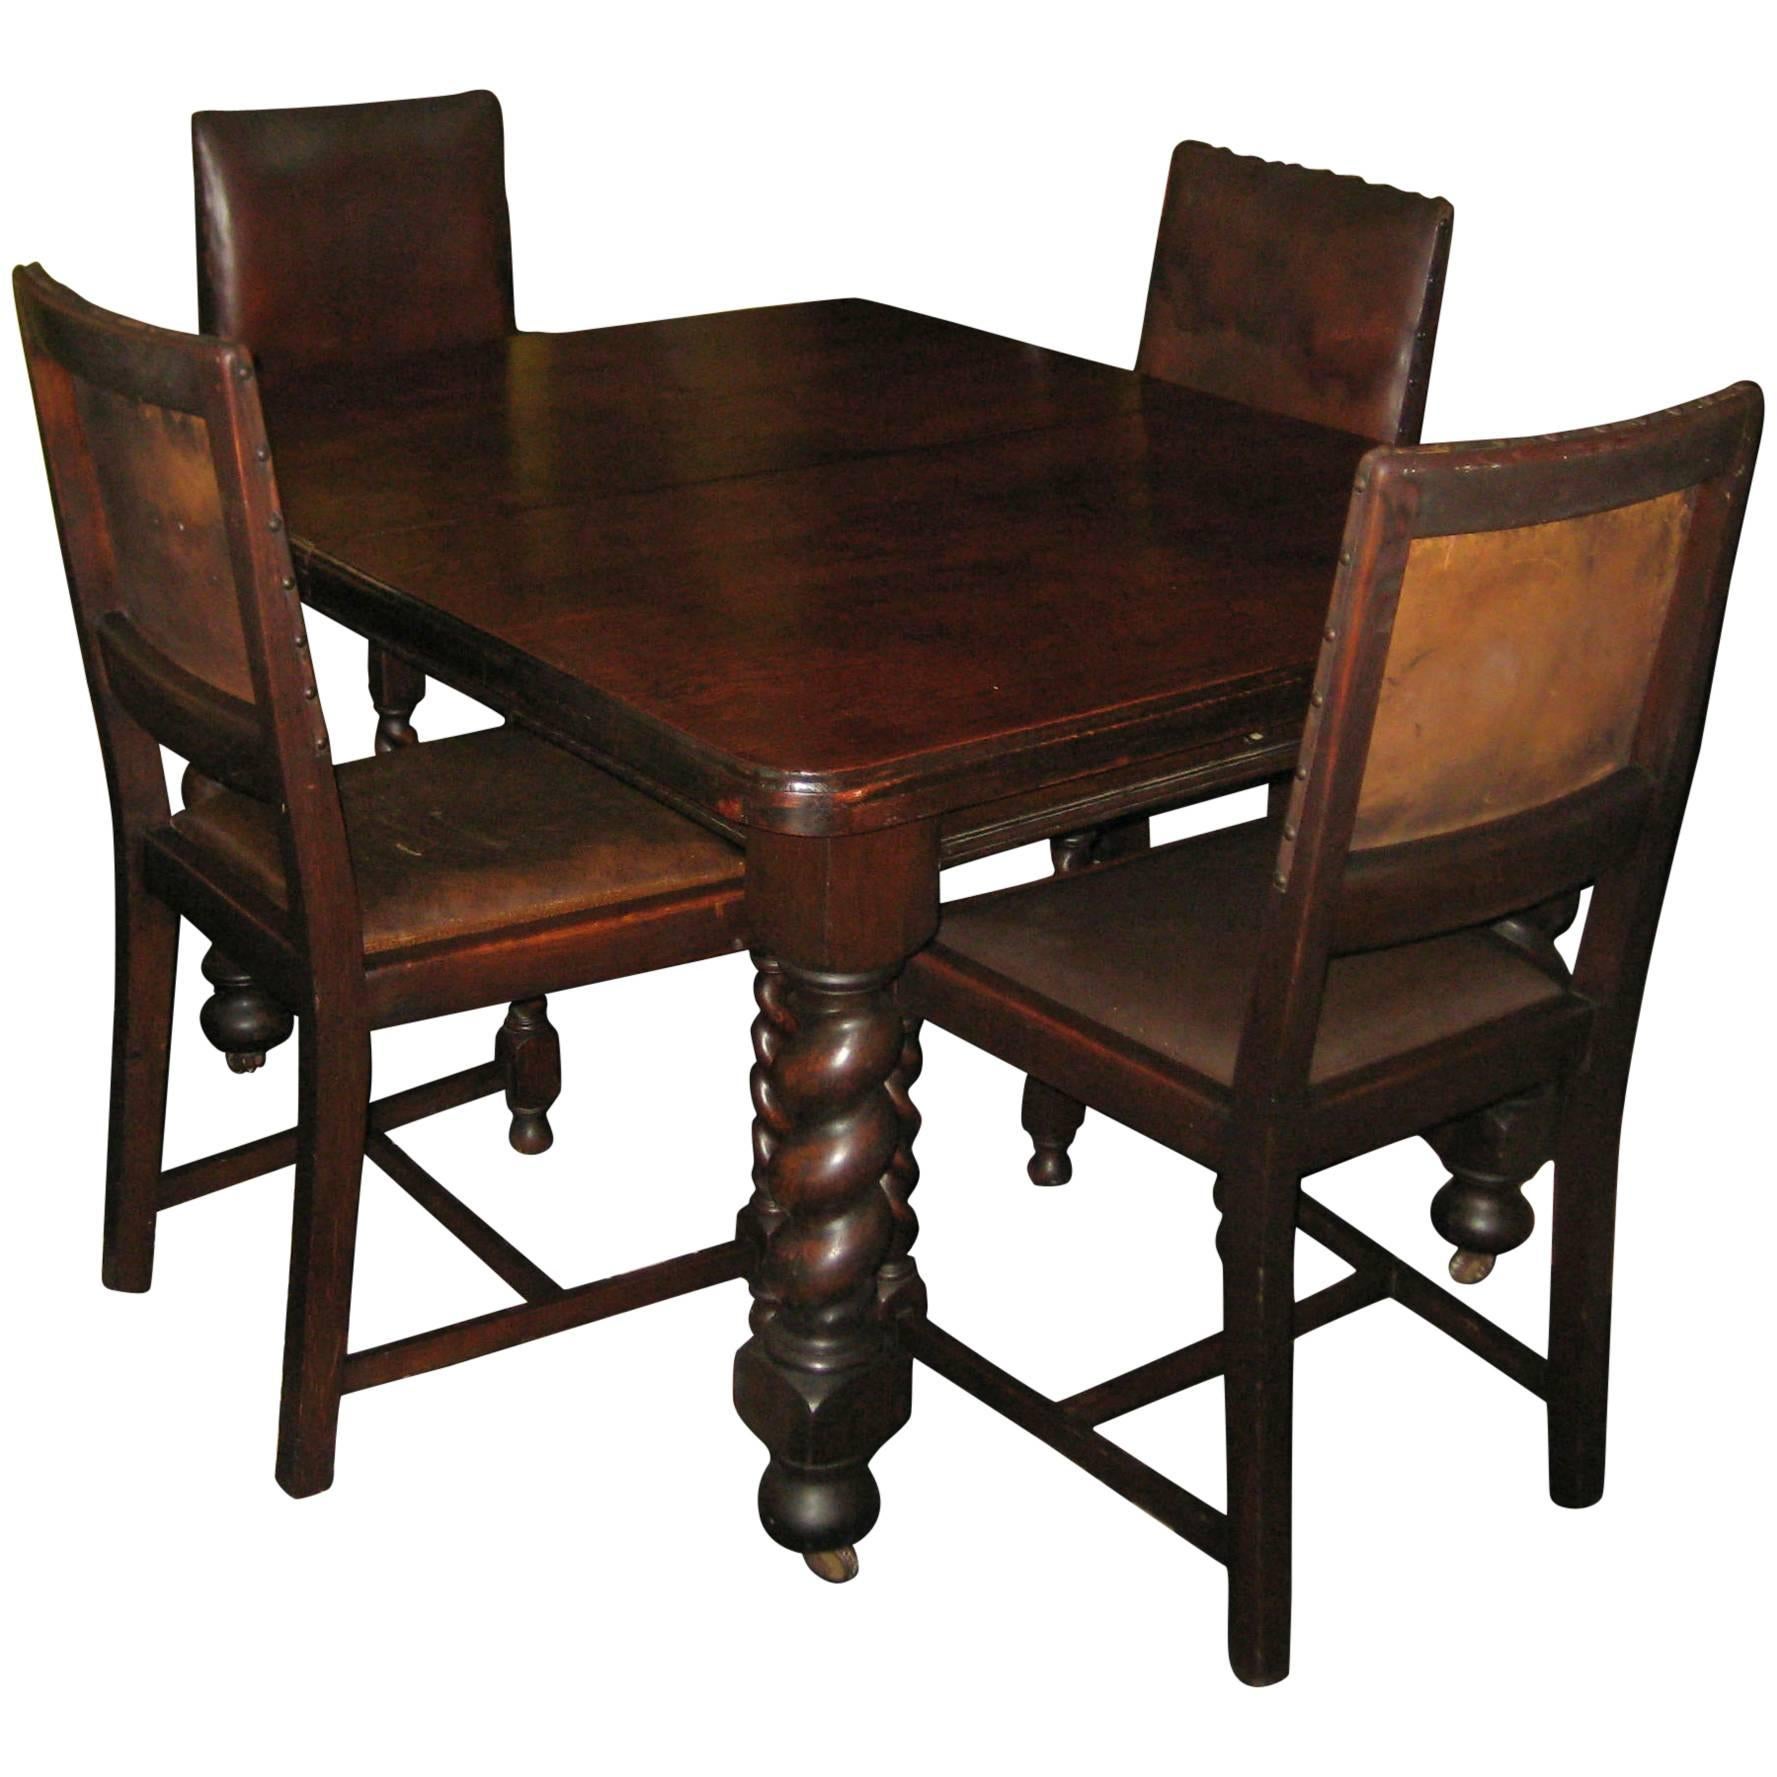 19th Century English Carved Oak Barley Twist Table and Four Chairs